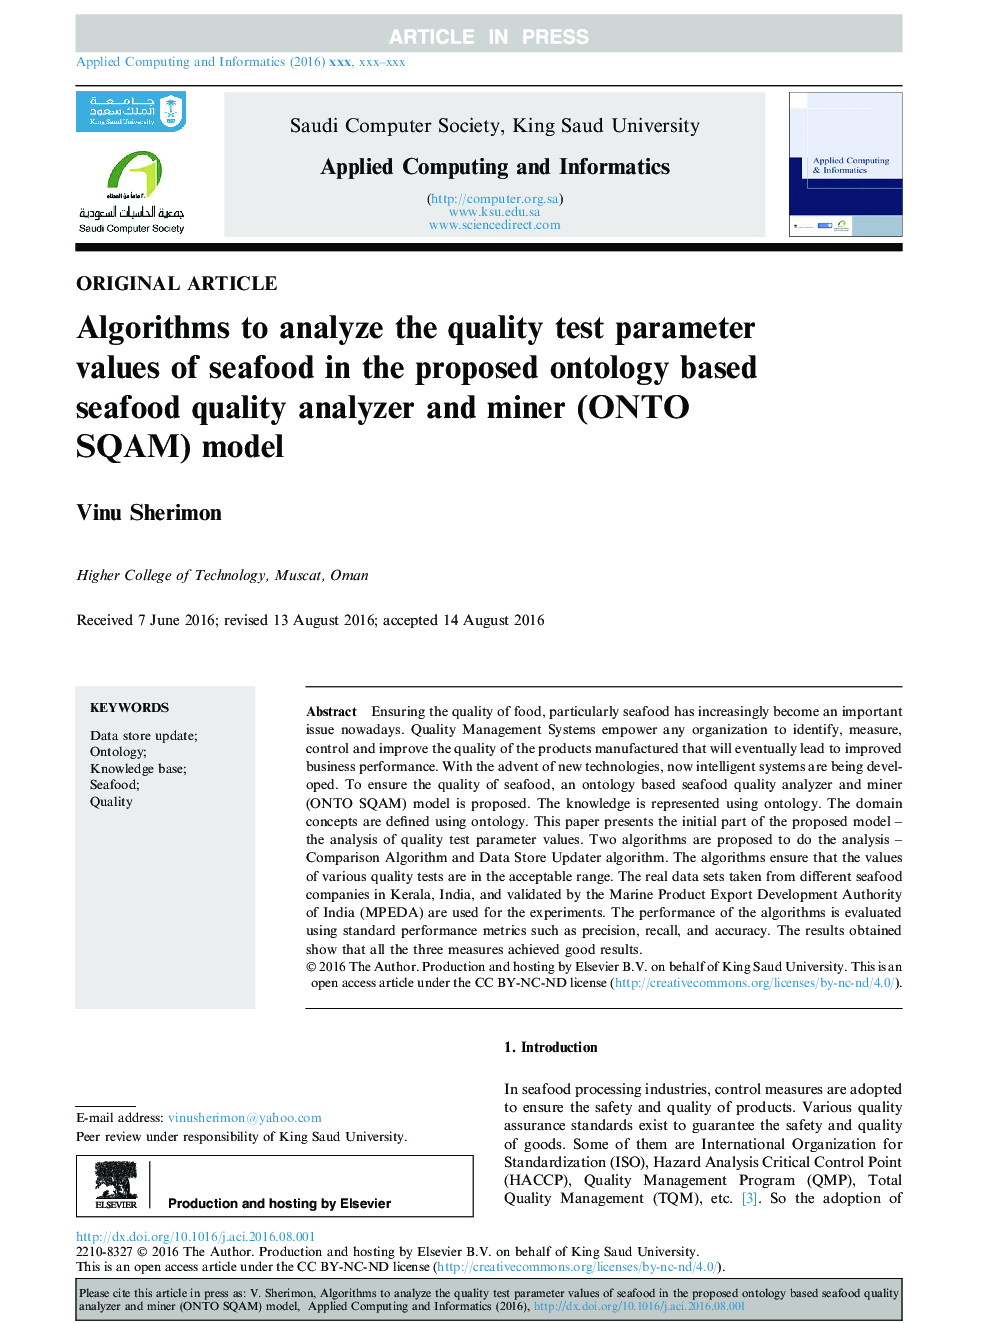 Algorithms to analyze the quality test parameter values of seafood in the proposed ontology based seafood quality analyzer and miner (ONTO SQAM) model